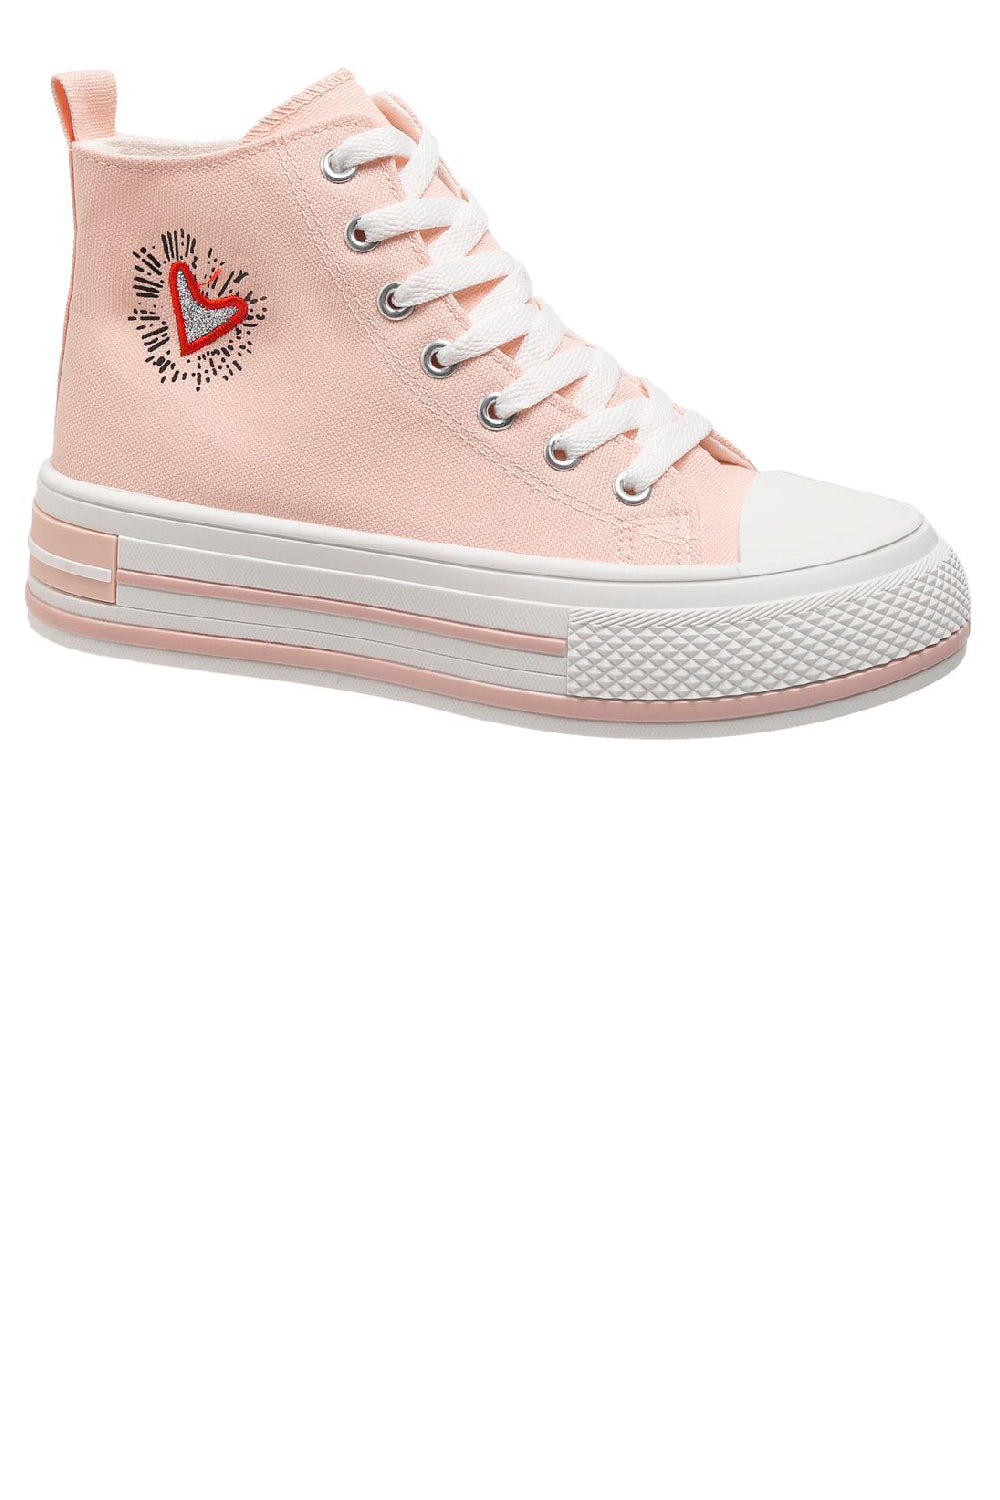 PINK CANVAS HIGH TOP LACE UP SNEAKERS TRAINERS